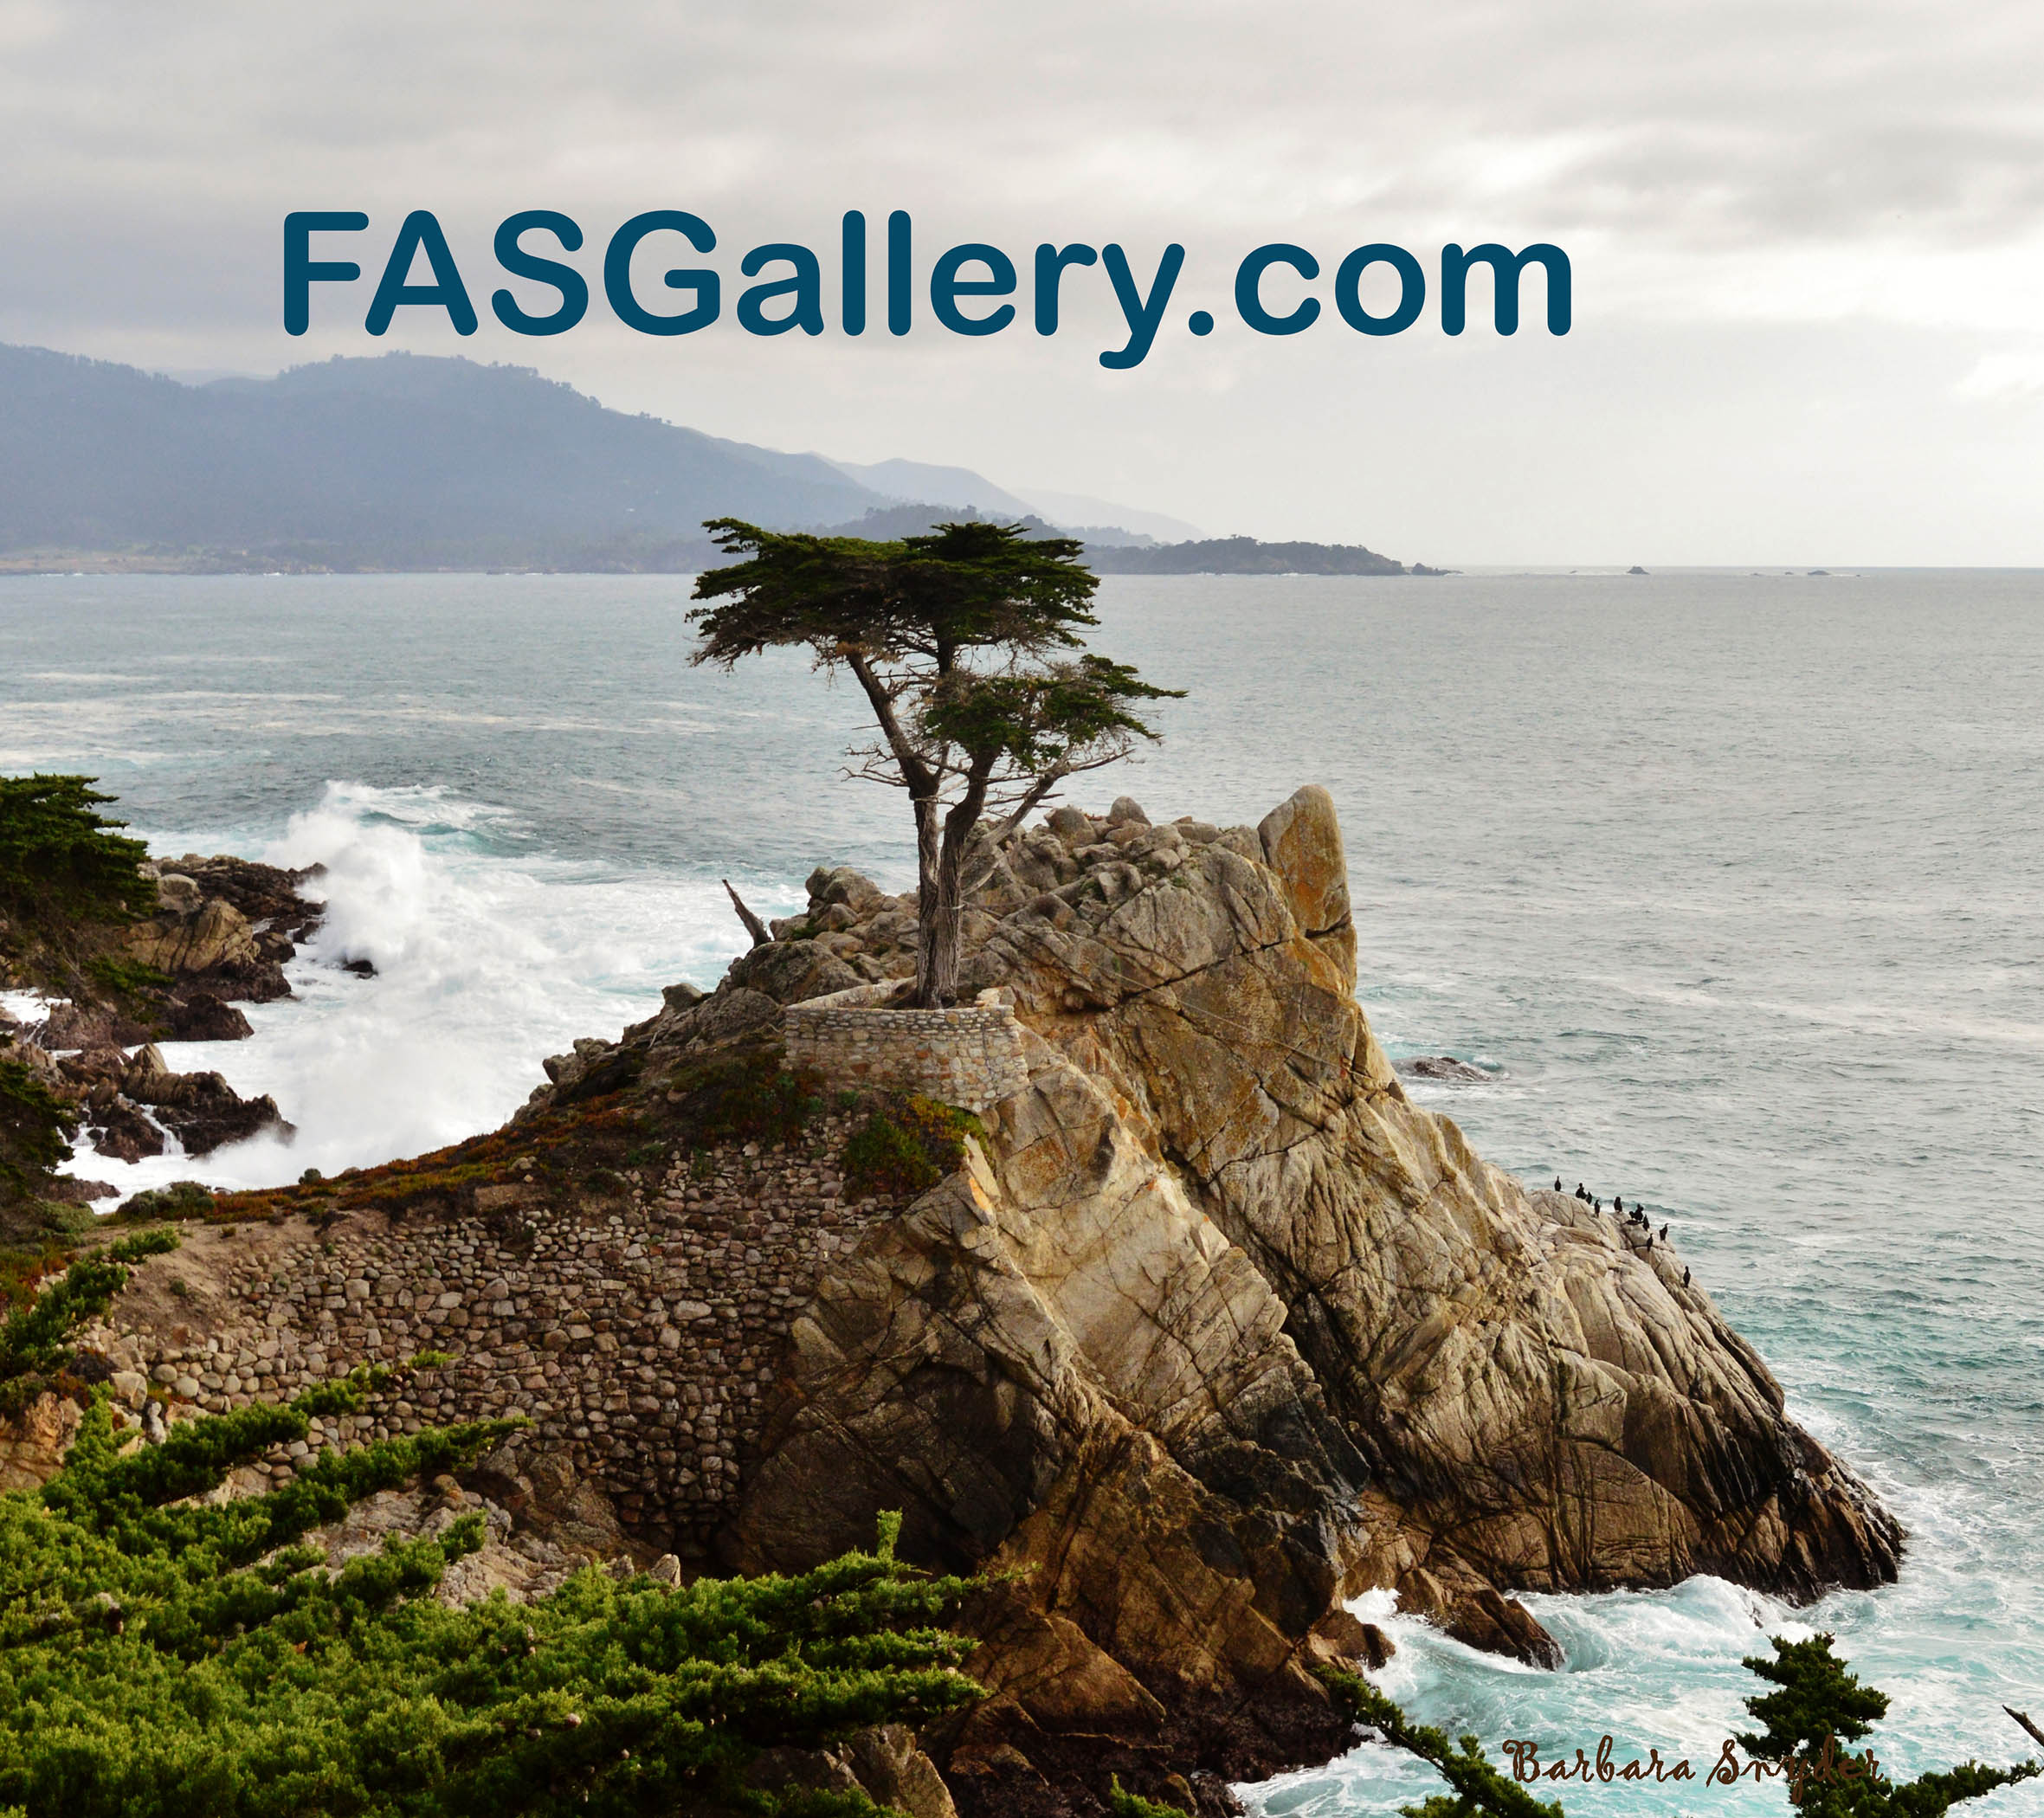 FASGallery